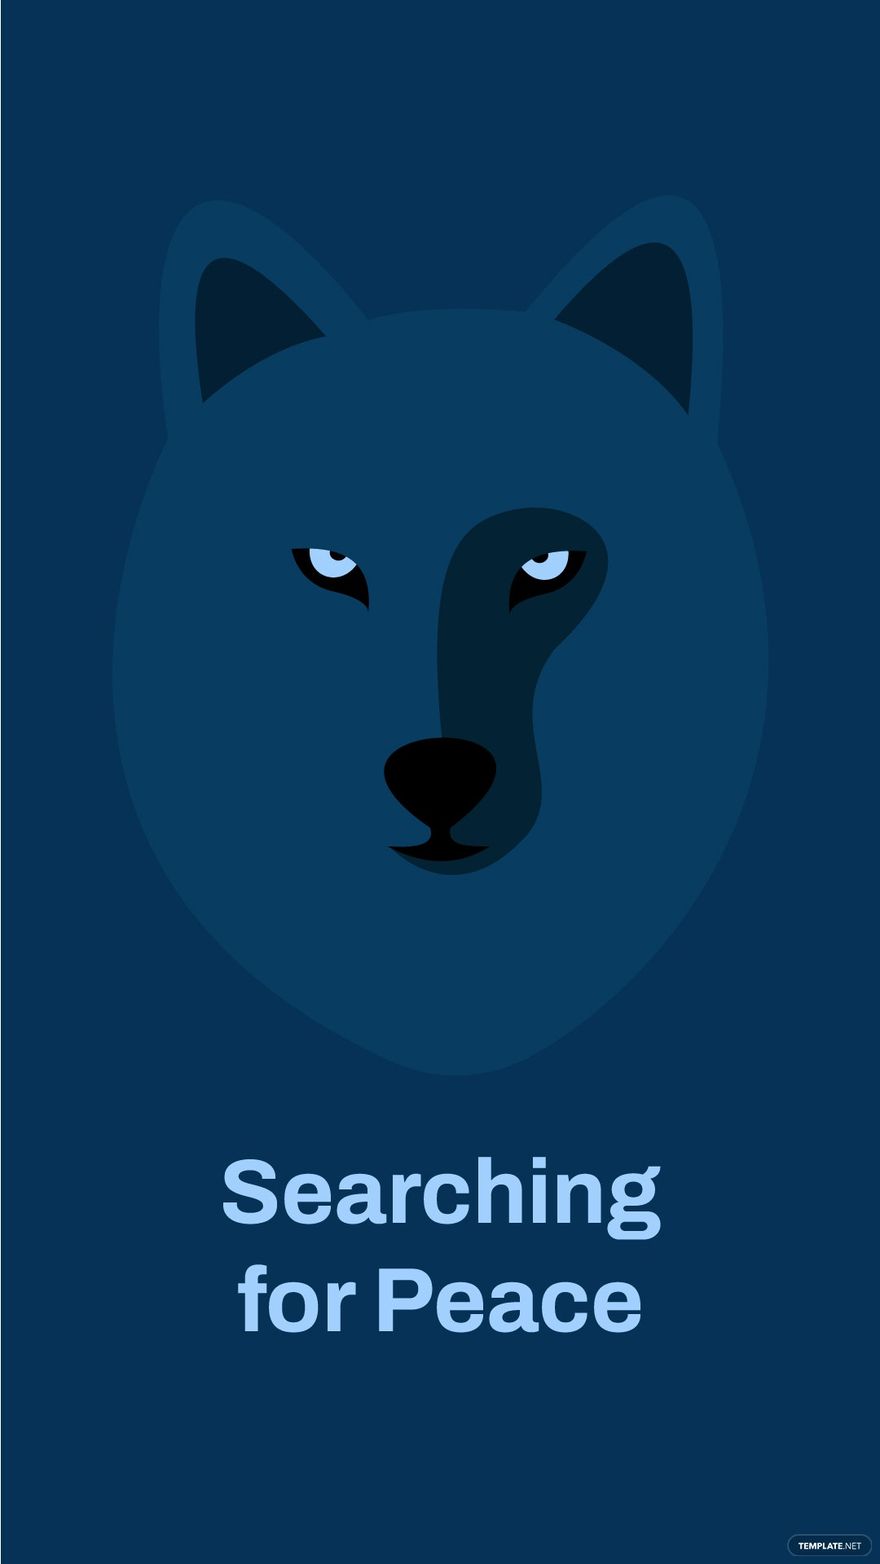 Free Wolf Wallpaper Iphone in Illustrator, EPS, SVG, JPG, PNG